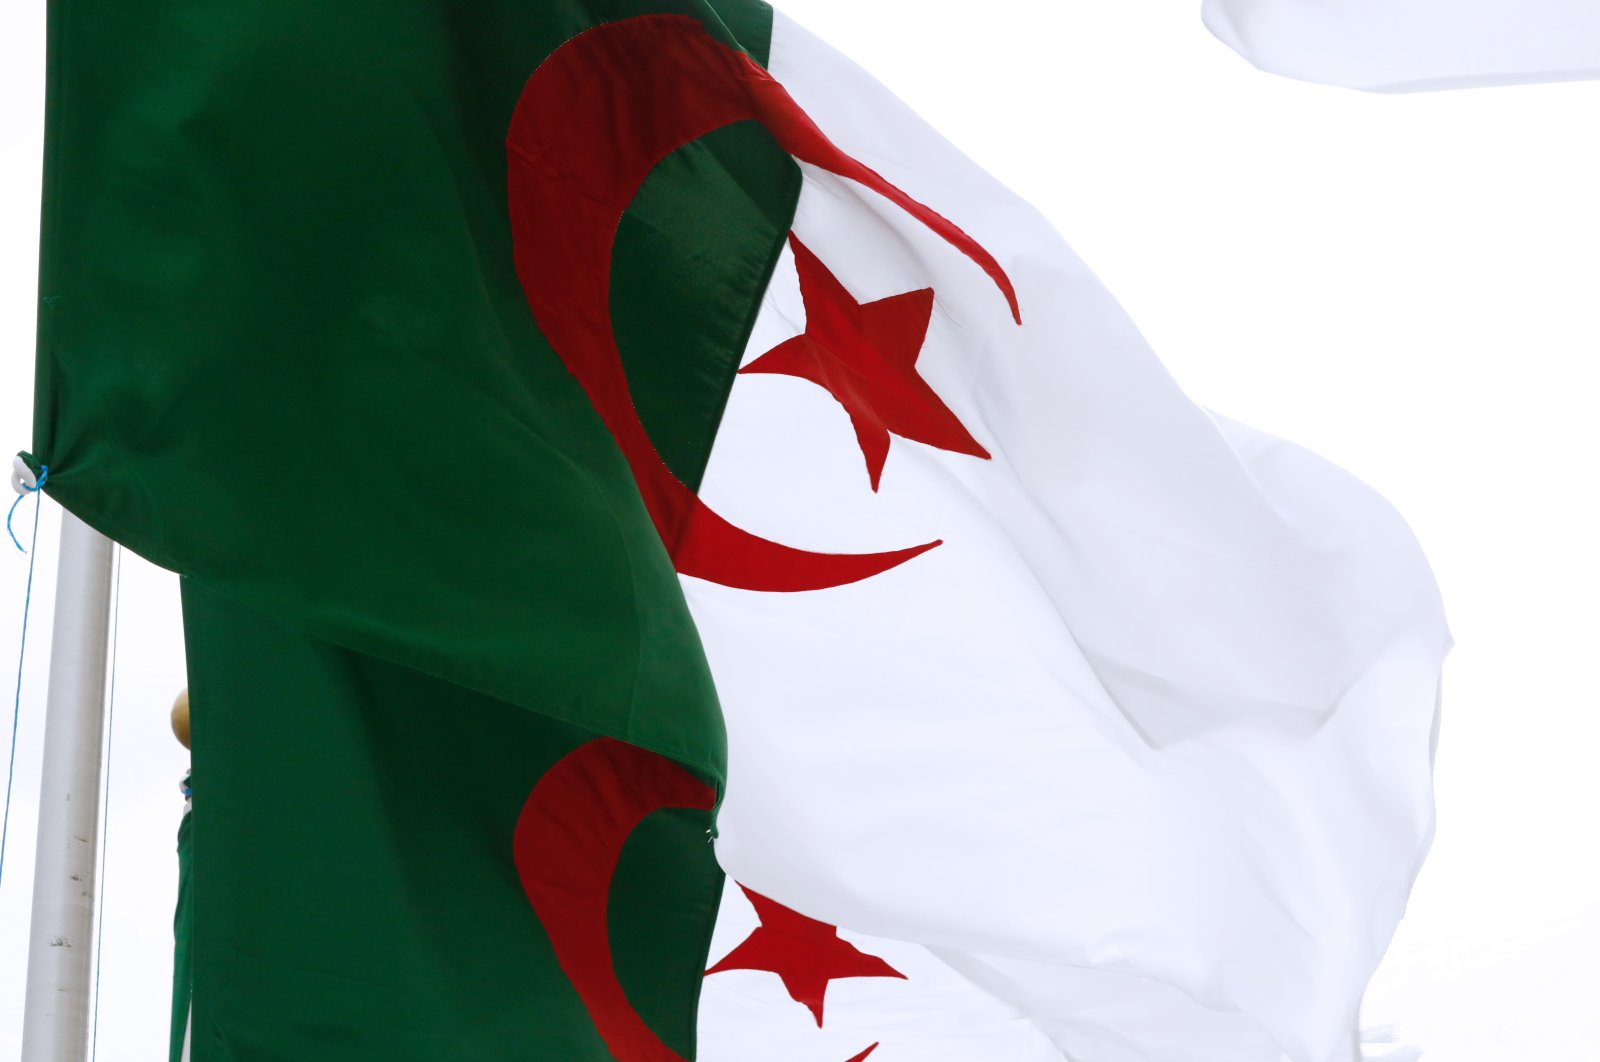 The national flag of the People's Democratic Republic of Algeria, Jan. 24, 2019. (Getty Images)